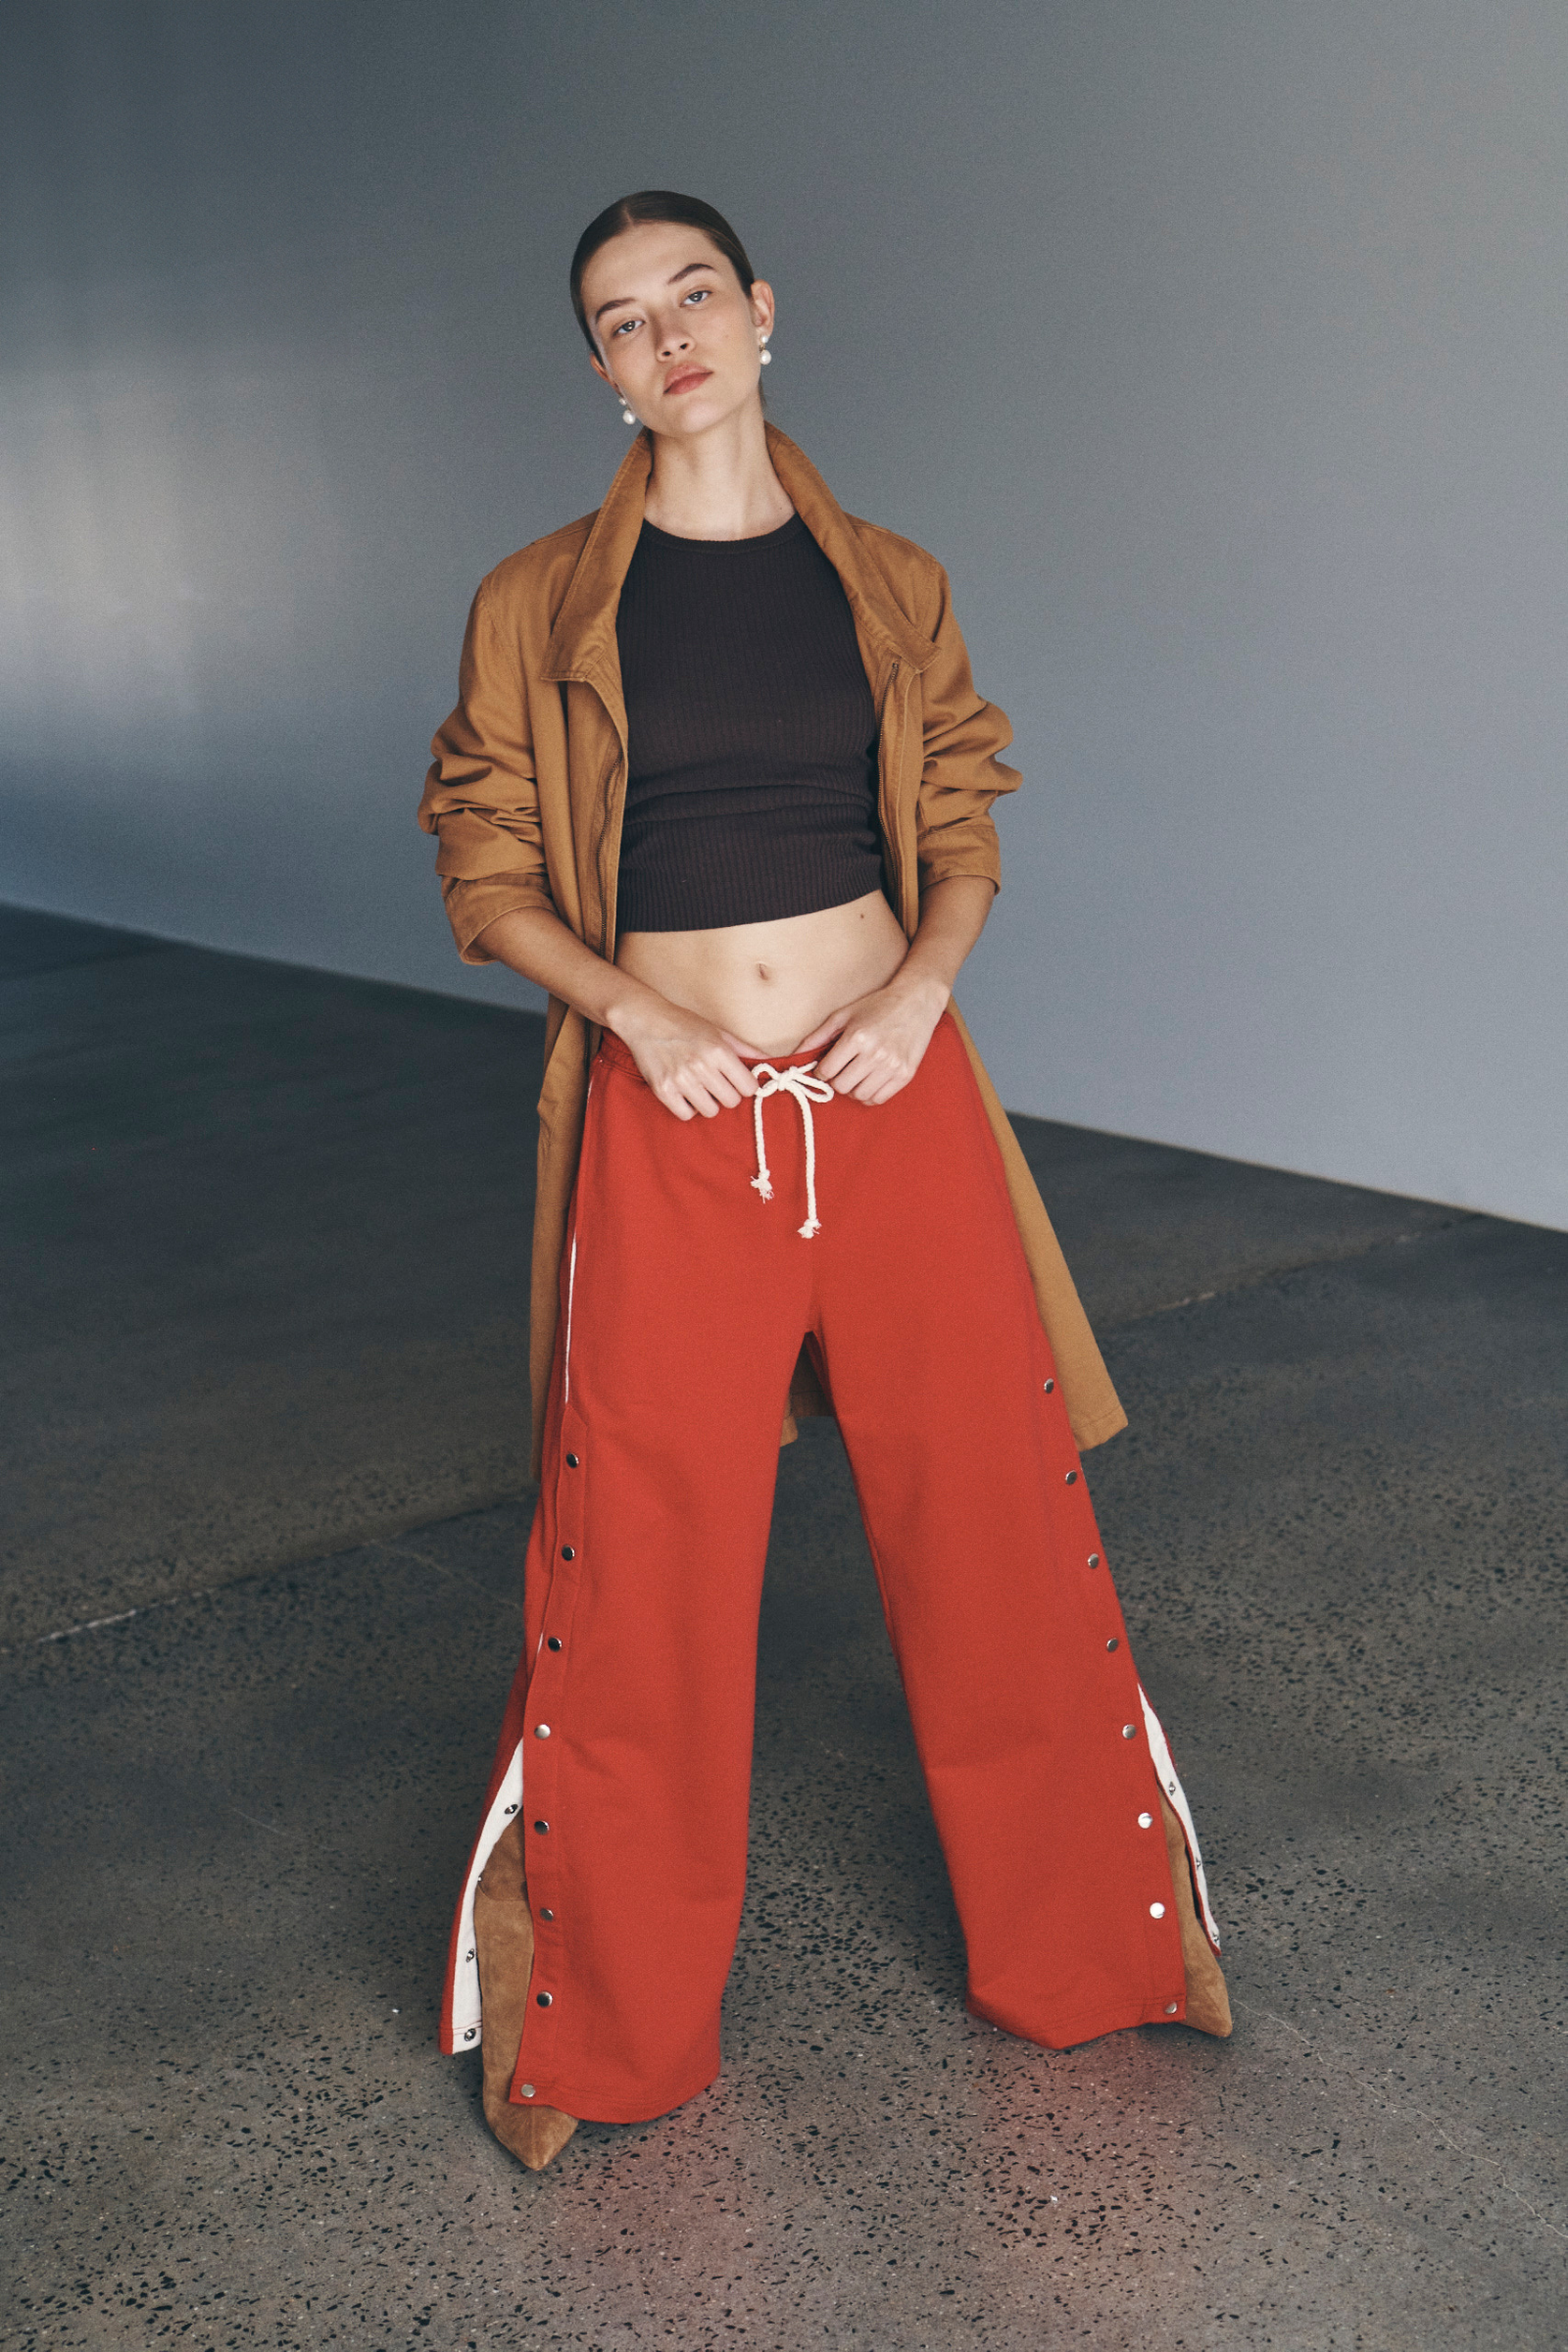 Bianca wears the Tait Jacket, Avery Knit Tank, and Vena Terry Snap Pants in Poppy Red. She accessorises with pearl drop earrings, brown suede knee-high boots, and completes the look with a low, slick bun. 